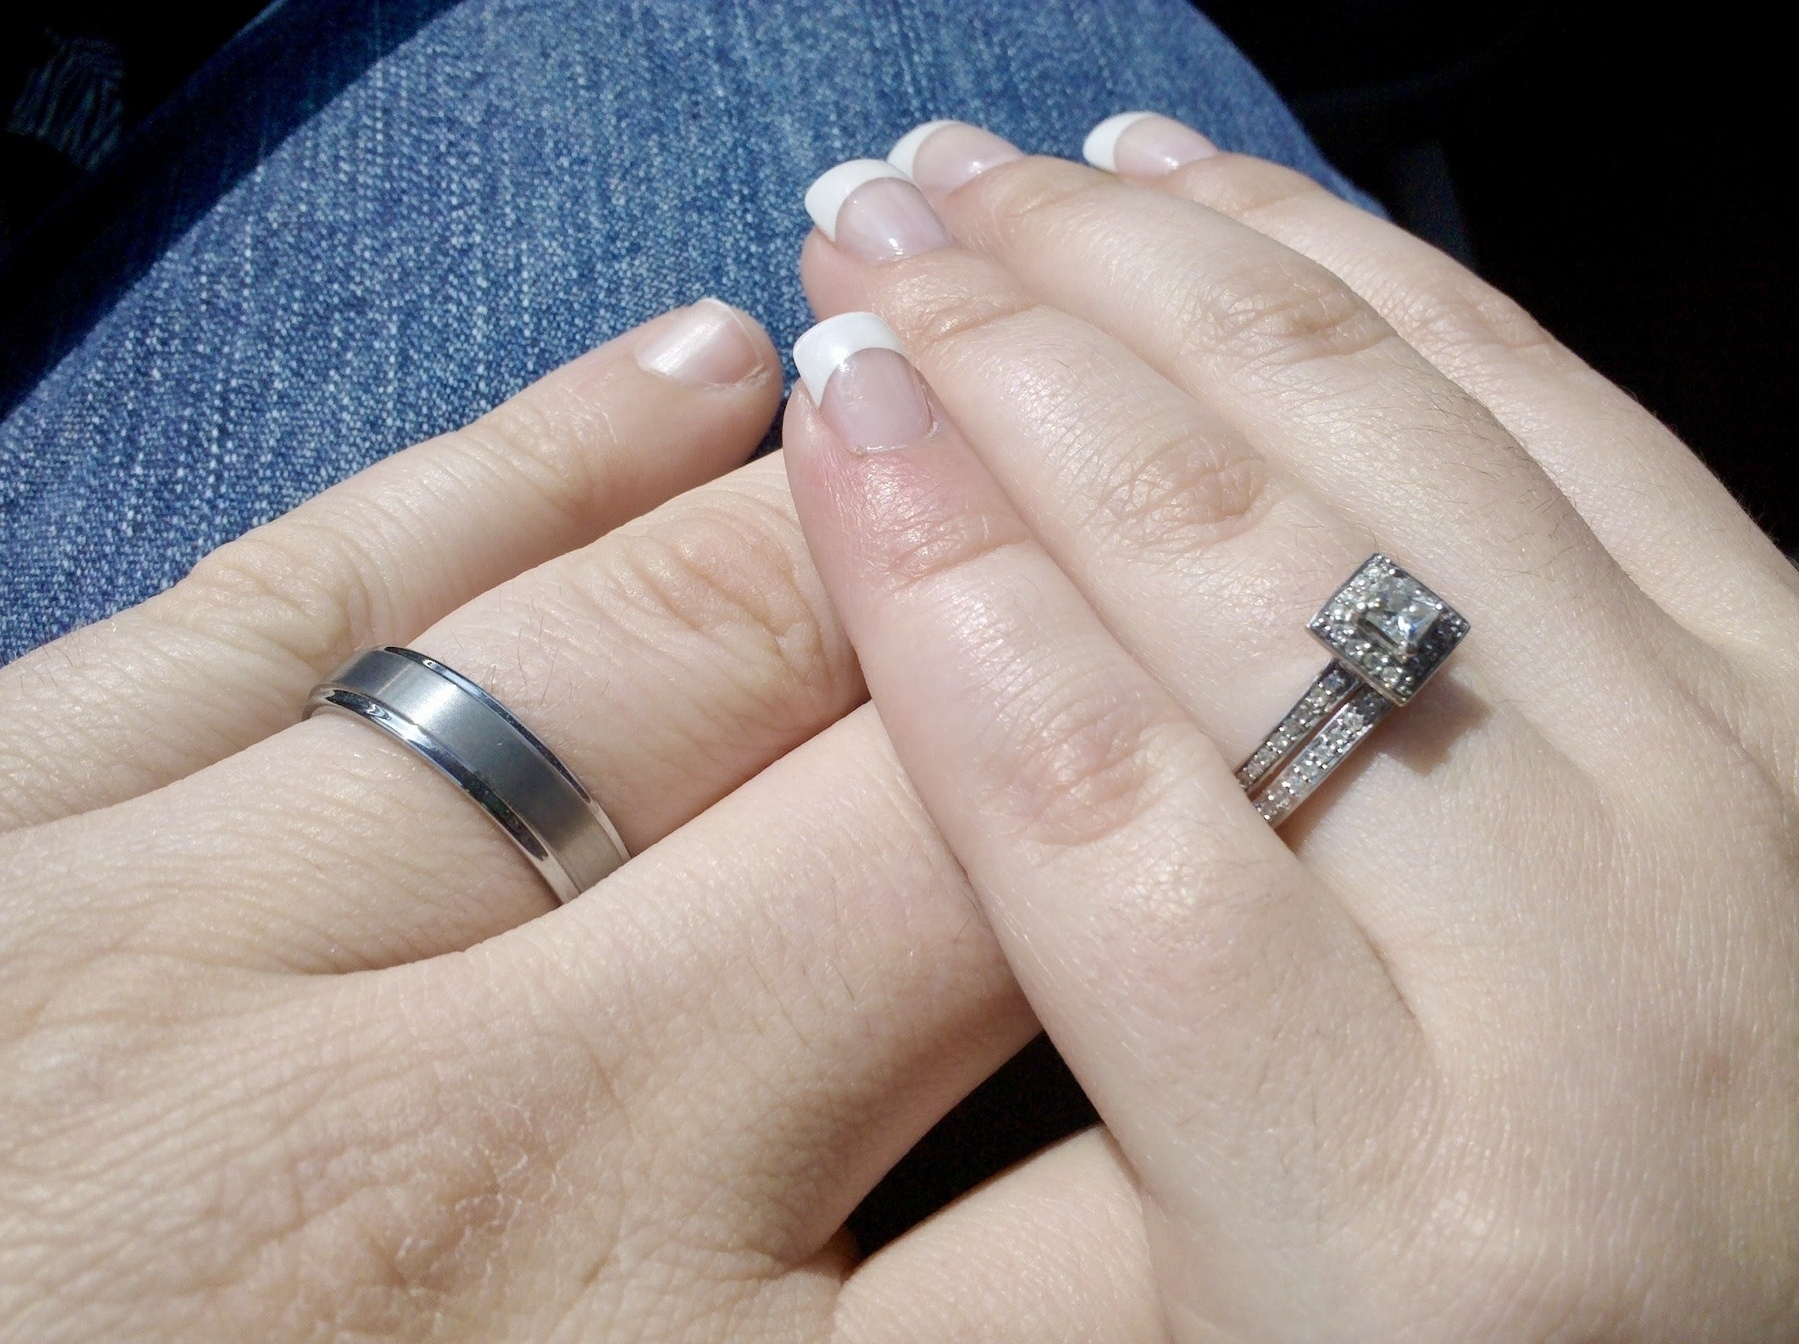 Two hands with wedding rings rest on a denim-clad leg. The left hand has a simple metal band, while the right hand features a square-cut diamond ring with a matching band. The right hand has manicured nails with French tips.